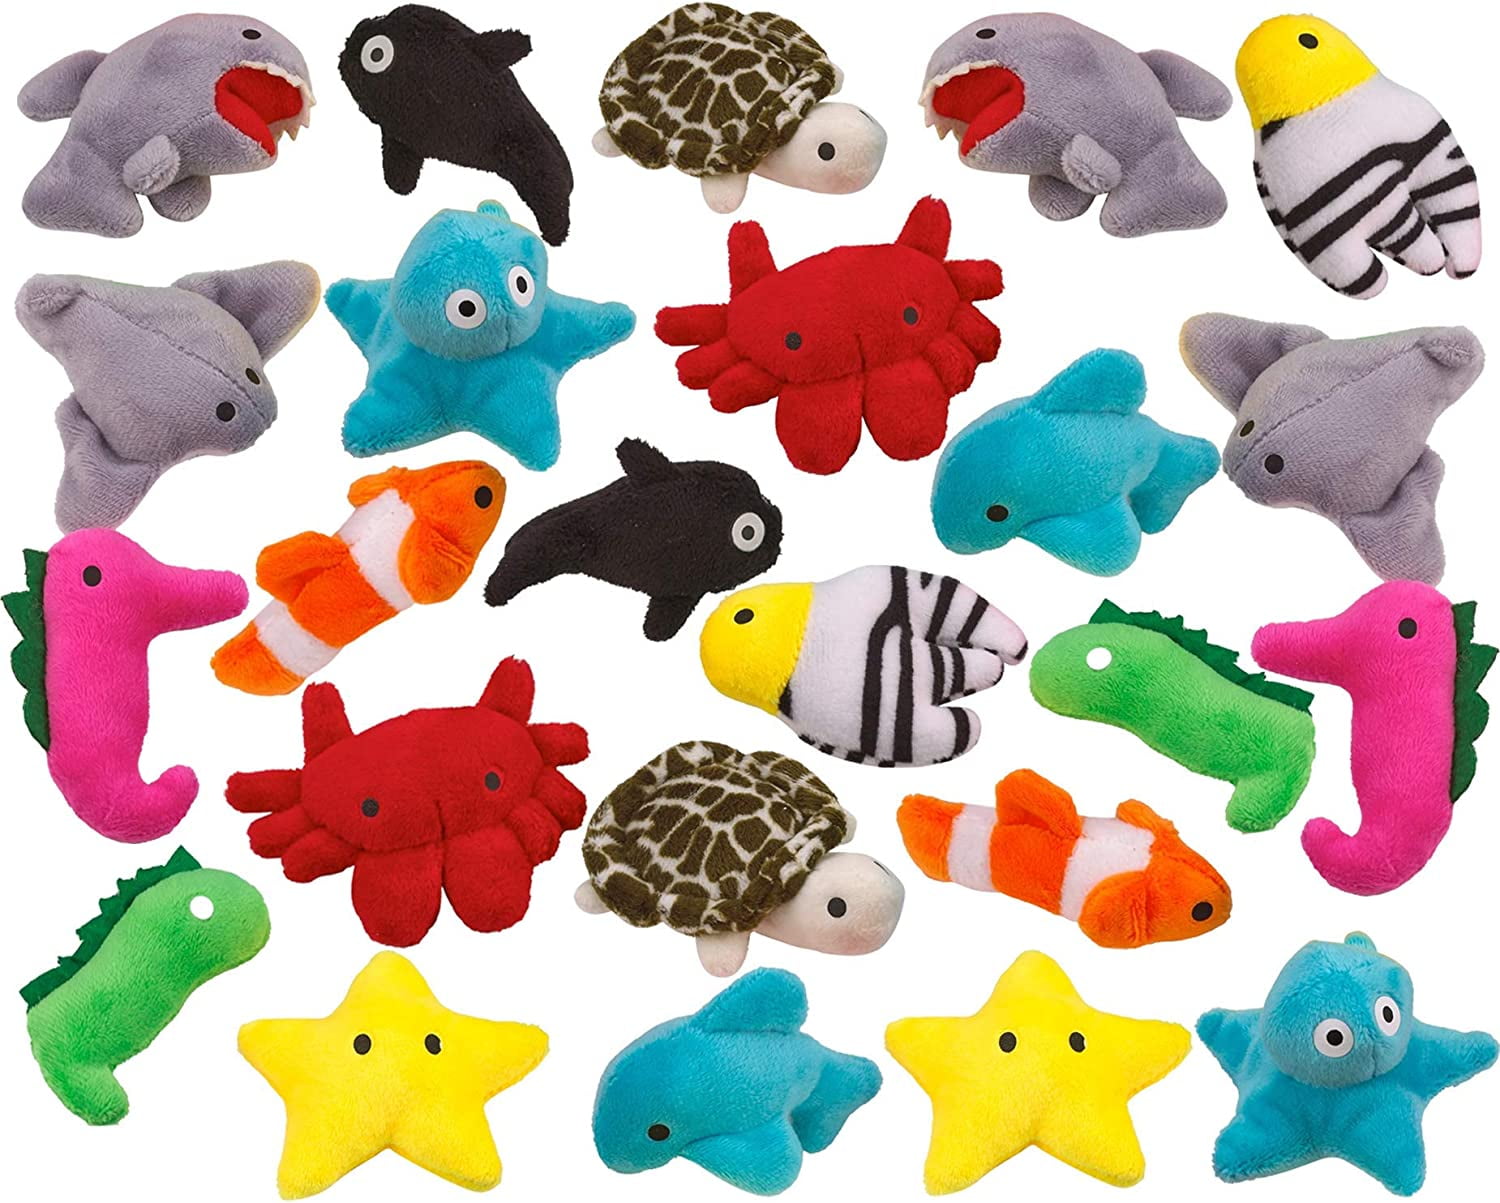 Kicko Sea-Life Plush Toys - 3 Inches - 24 Assorted Pieces - for Kids,  Babies, Adults, Decorations, Bedtime, Sleep, Play, and 